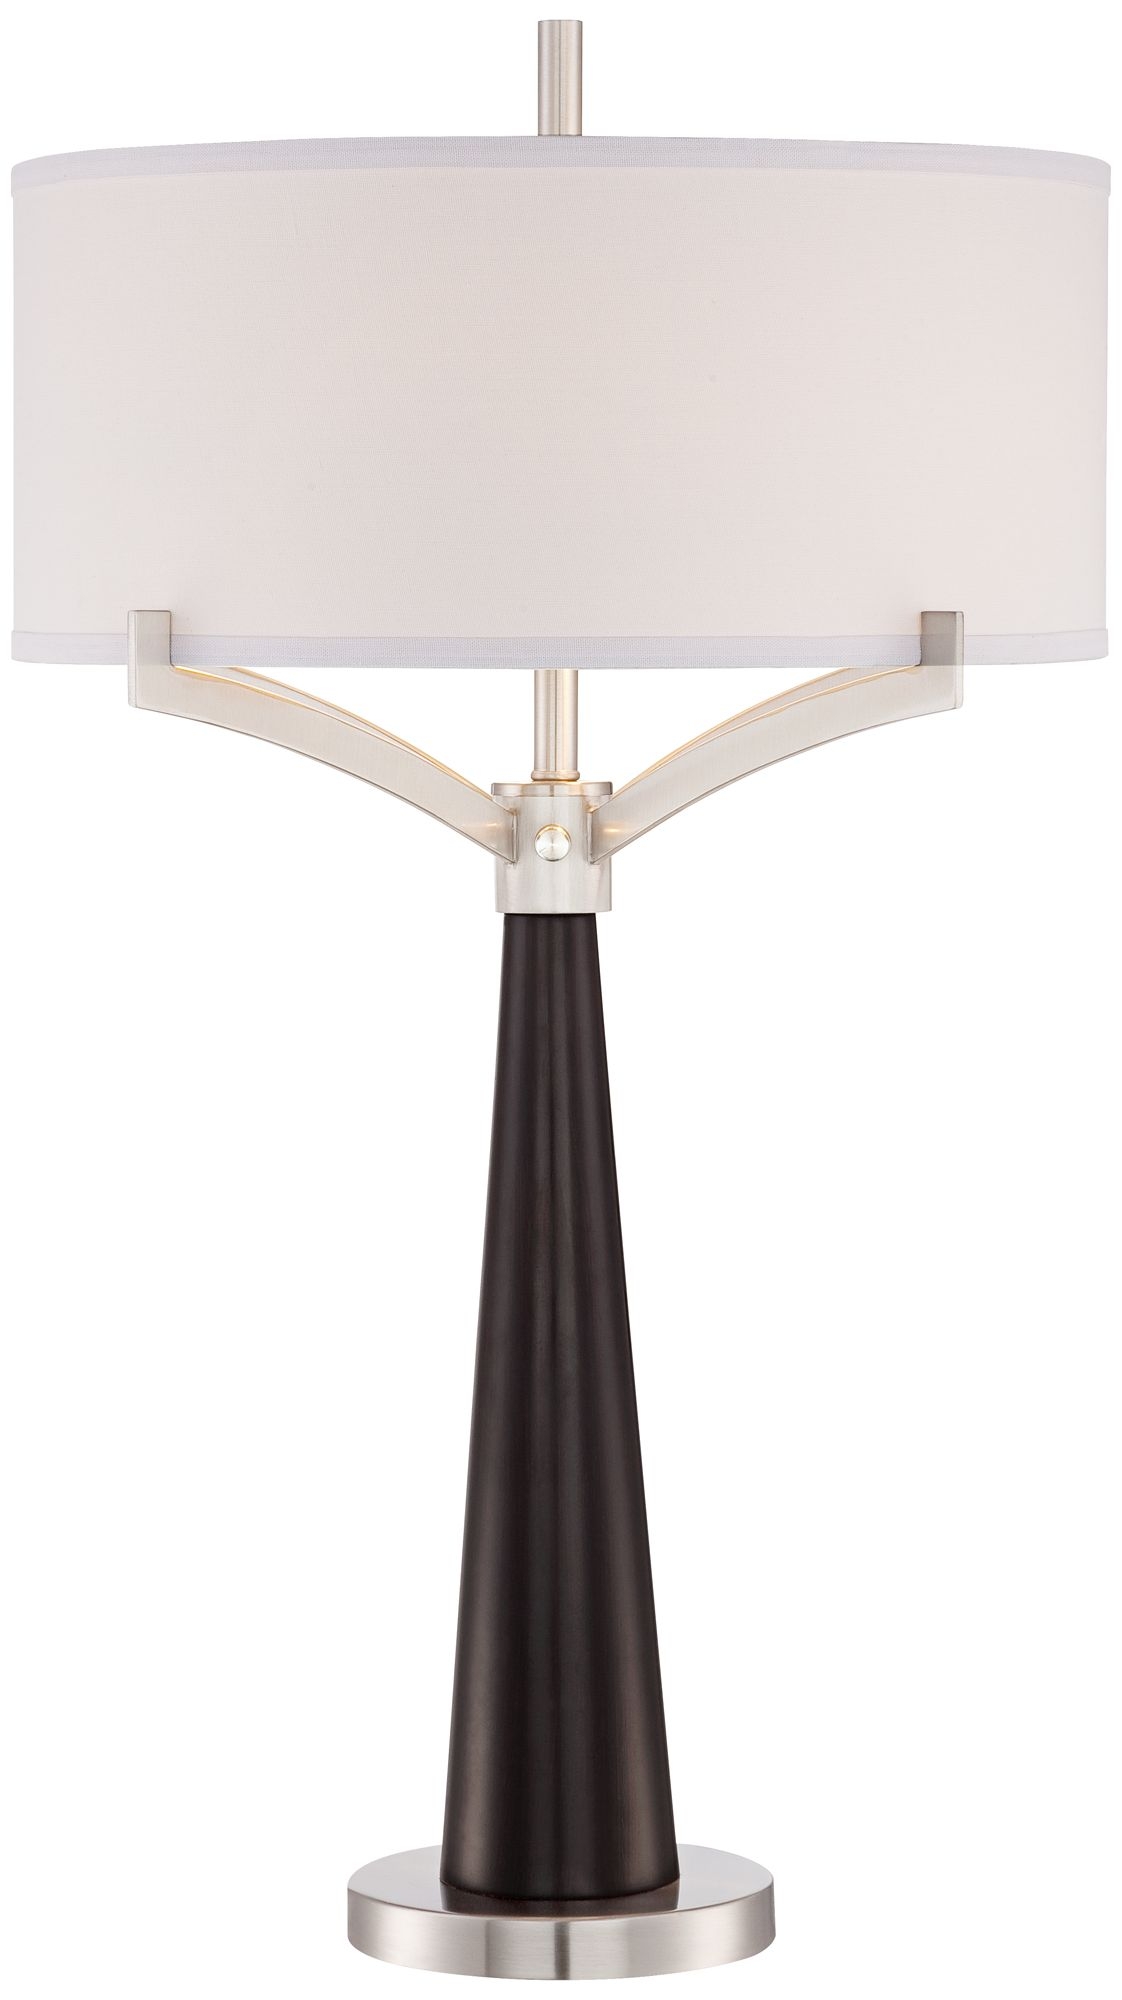 Tremont Espresso and Brushed Steel Iron Table Lamp - Image 0